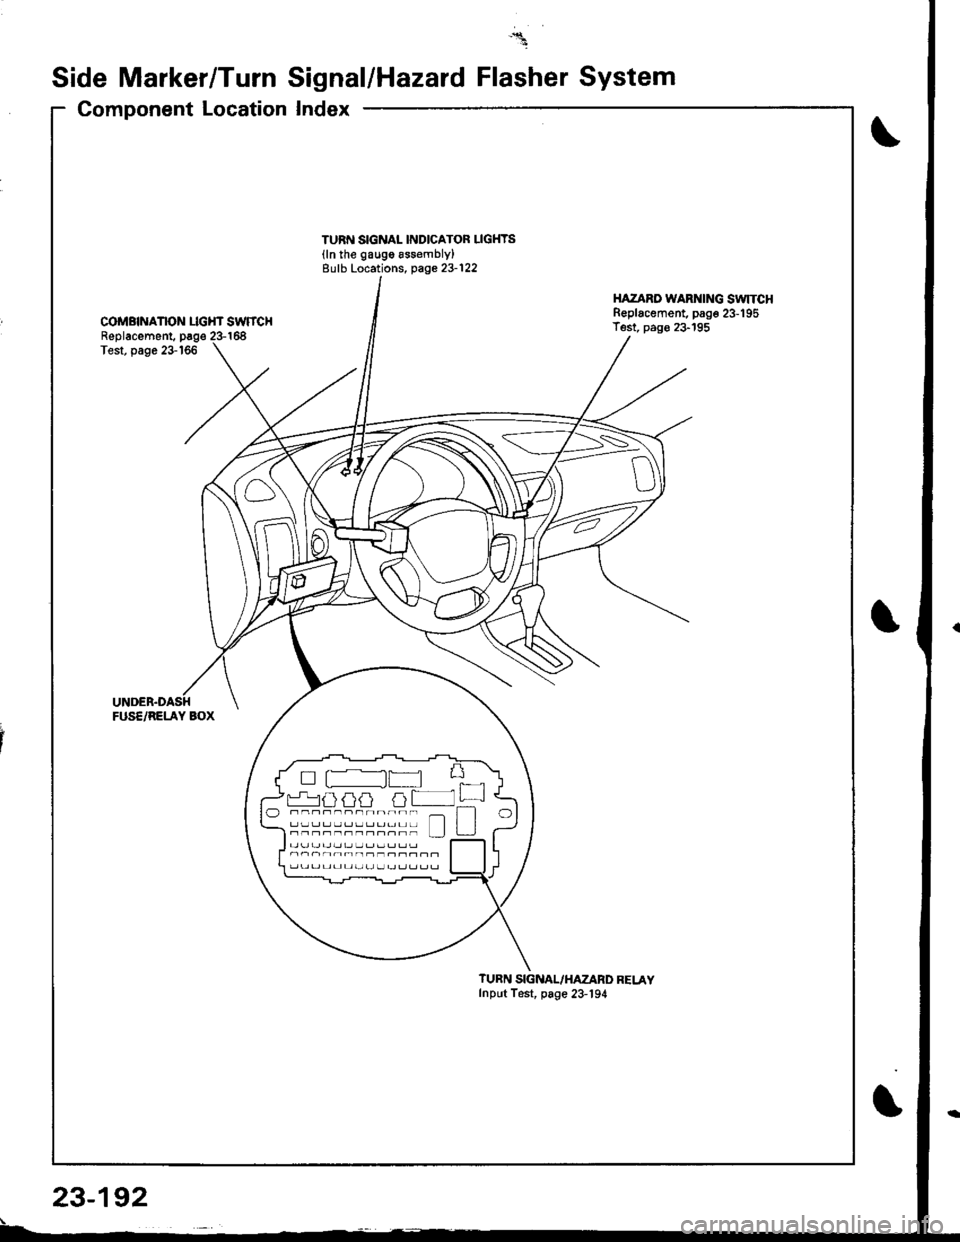 HONDA INTEGRA 1998 4.G Workshop Manual Side Marker/Turn Signal/Hazard Flasher System
Component Location
TURf{ SIGNAL INDICATOF LIGHYS(ln the gaugo assembly)Eulb Locations, page 23-122
COMBNANON LIGHT SWTTCHReplacement. page 23-168Test, pag